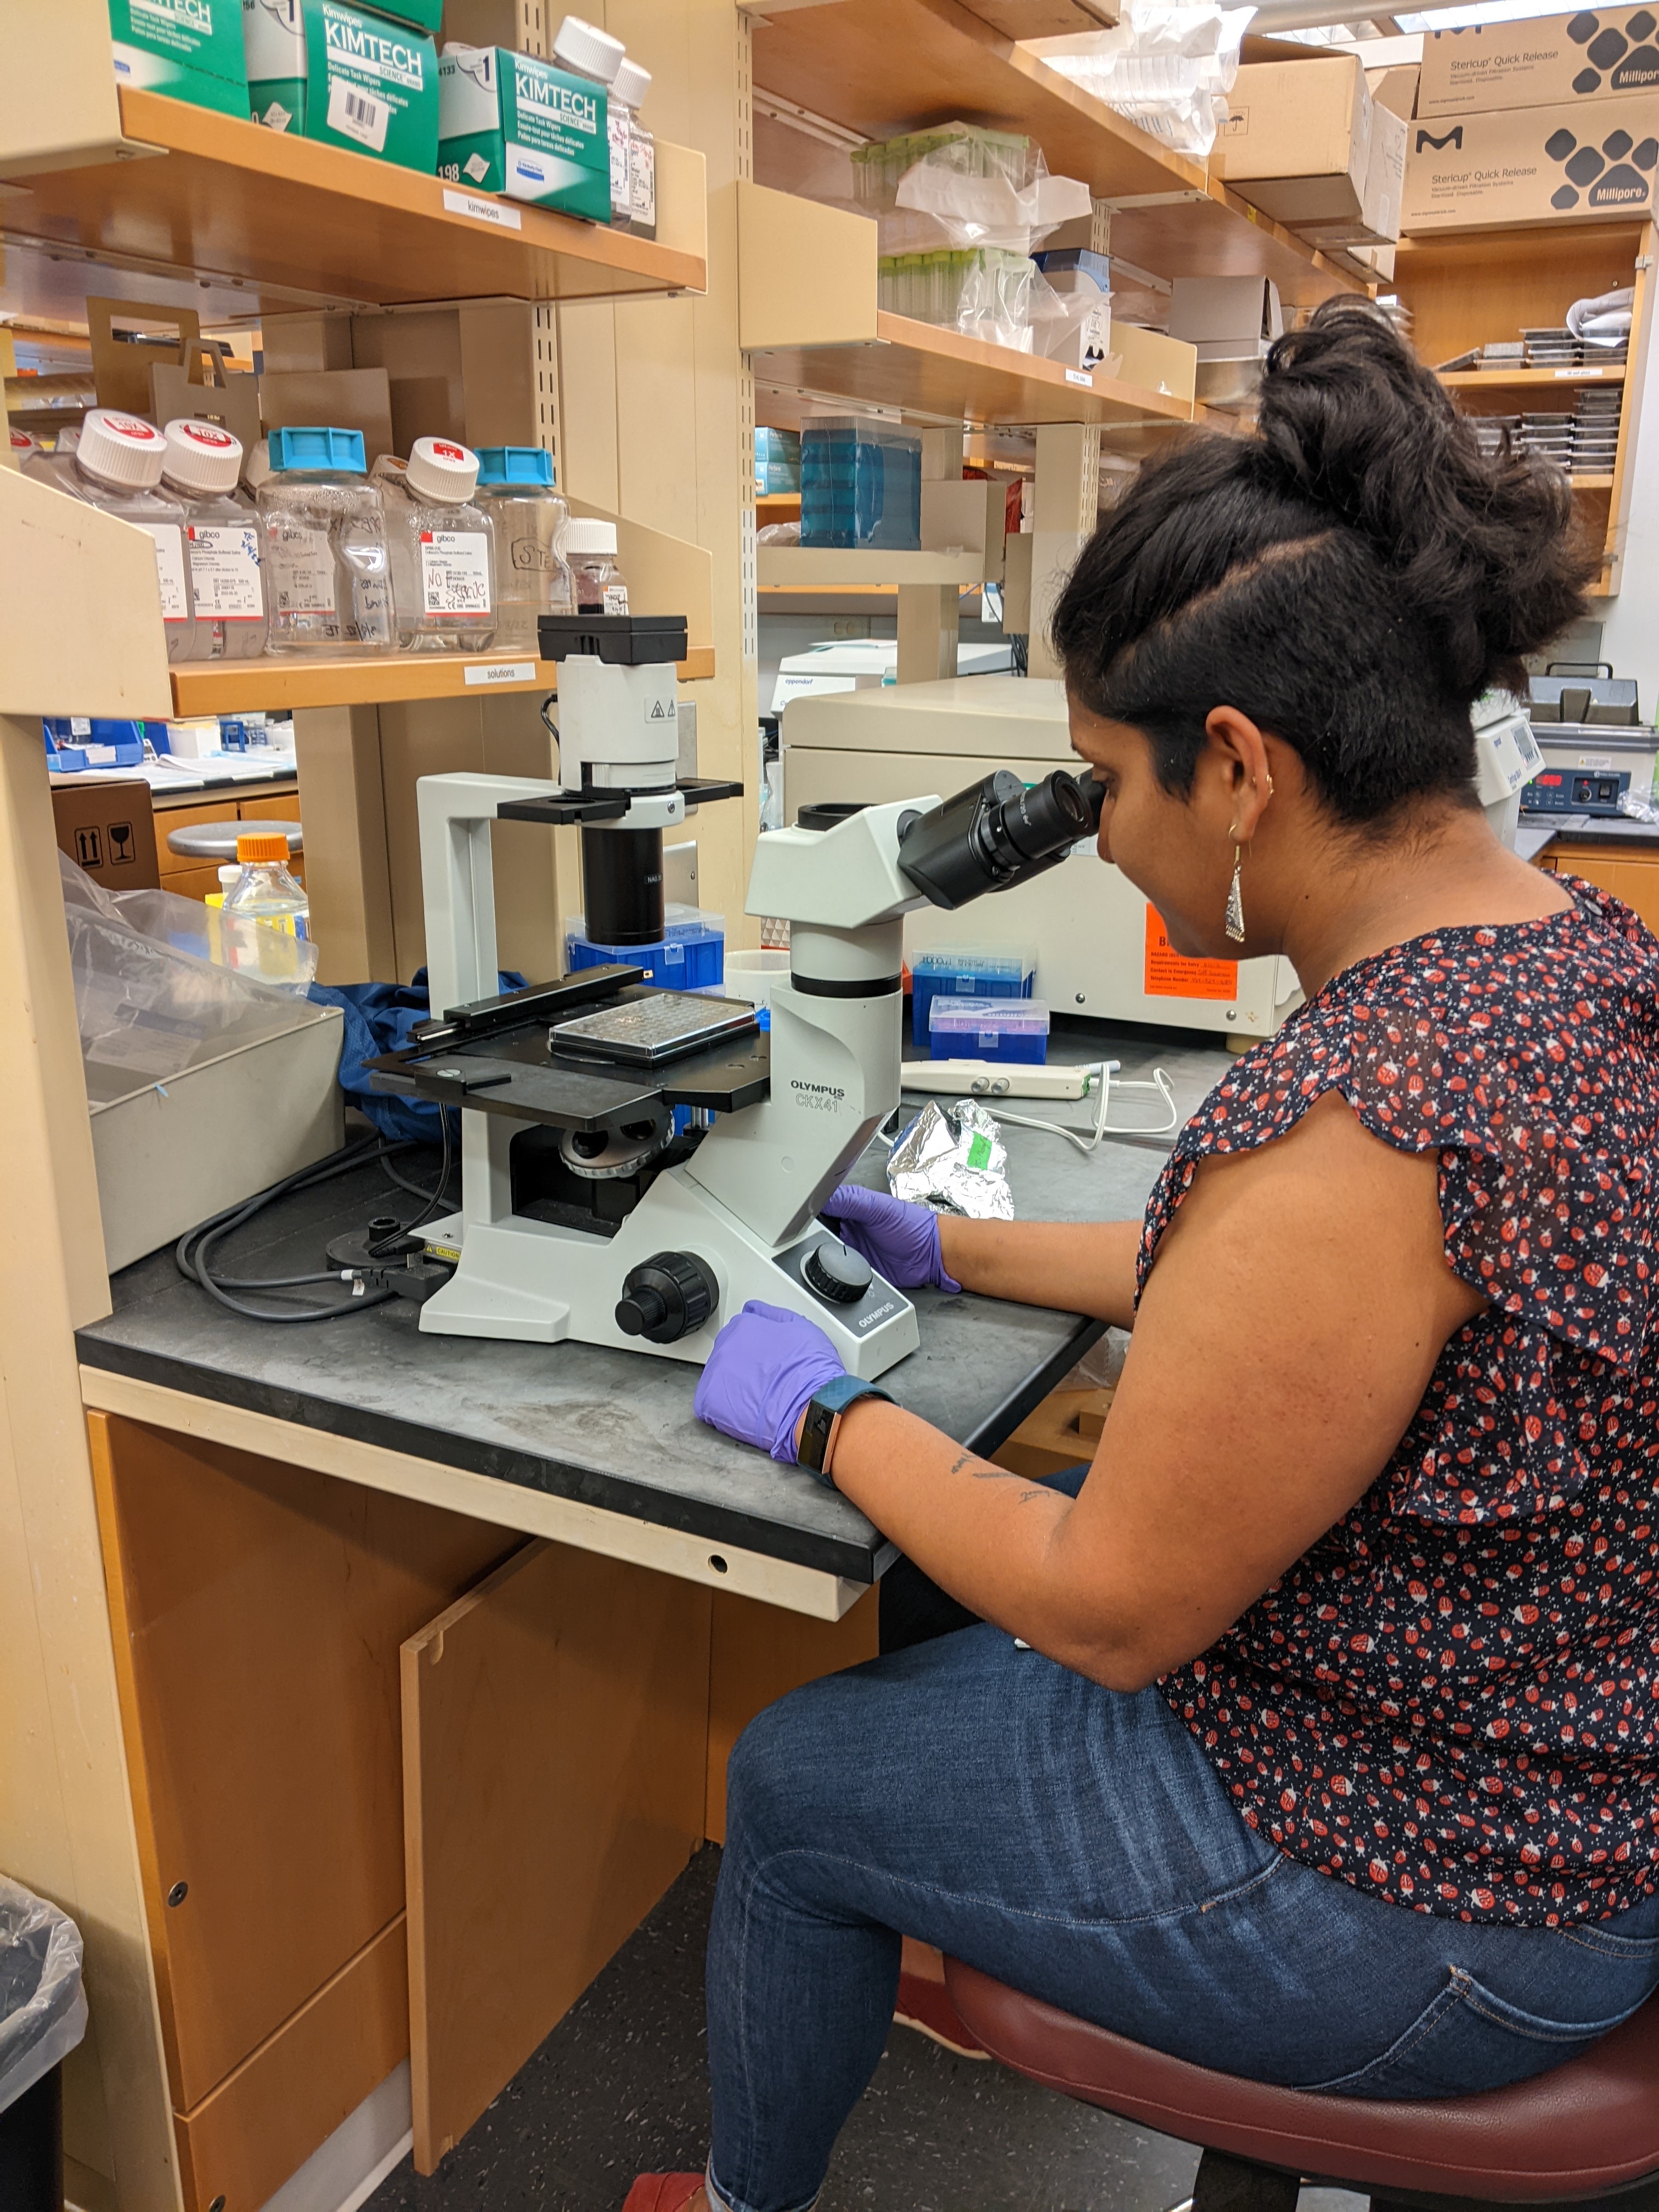 PhD candidate Mukti Chowkwale sits behind a microscope in a biomedical engineering lab